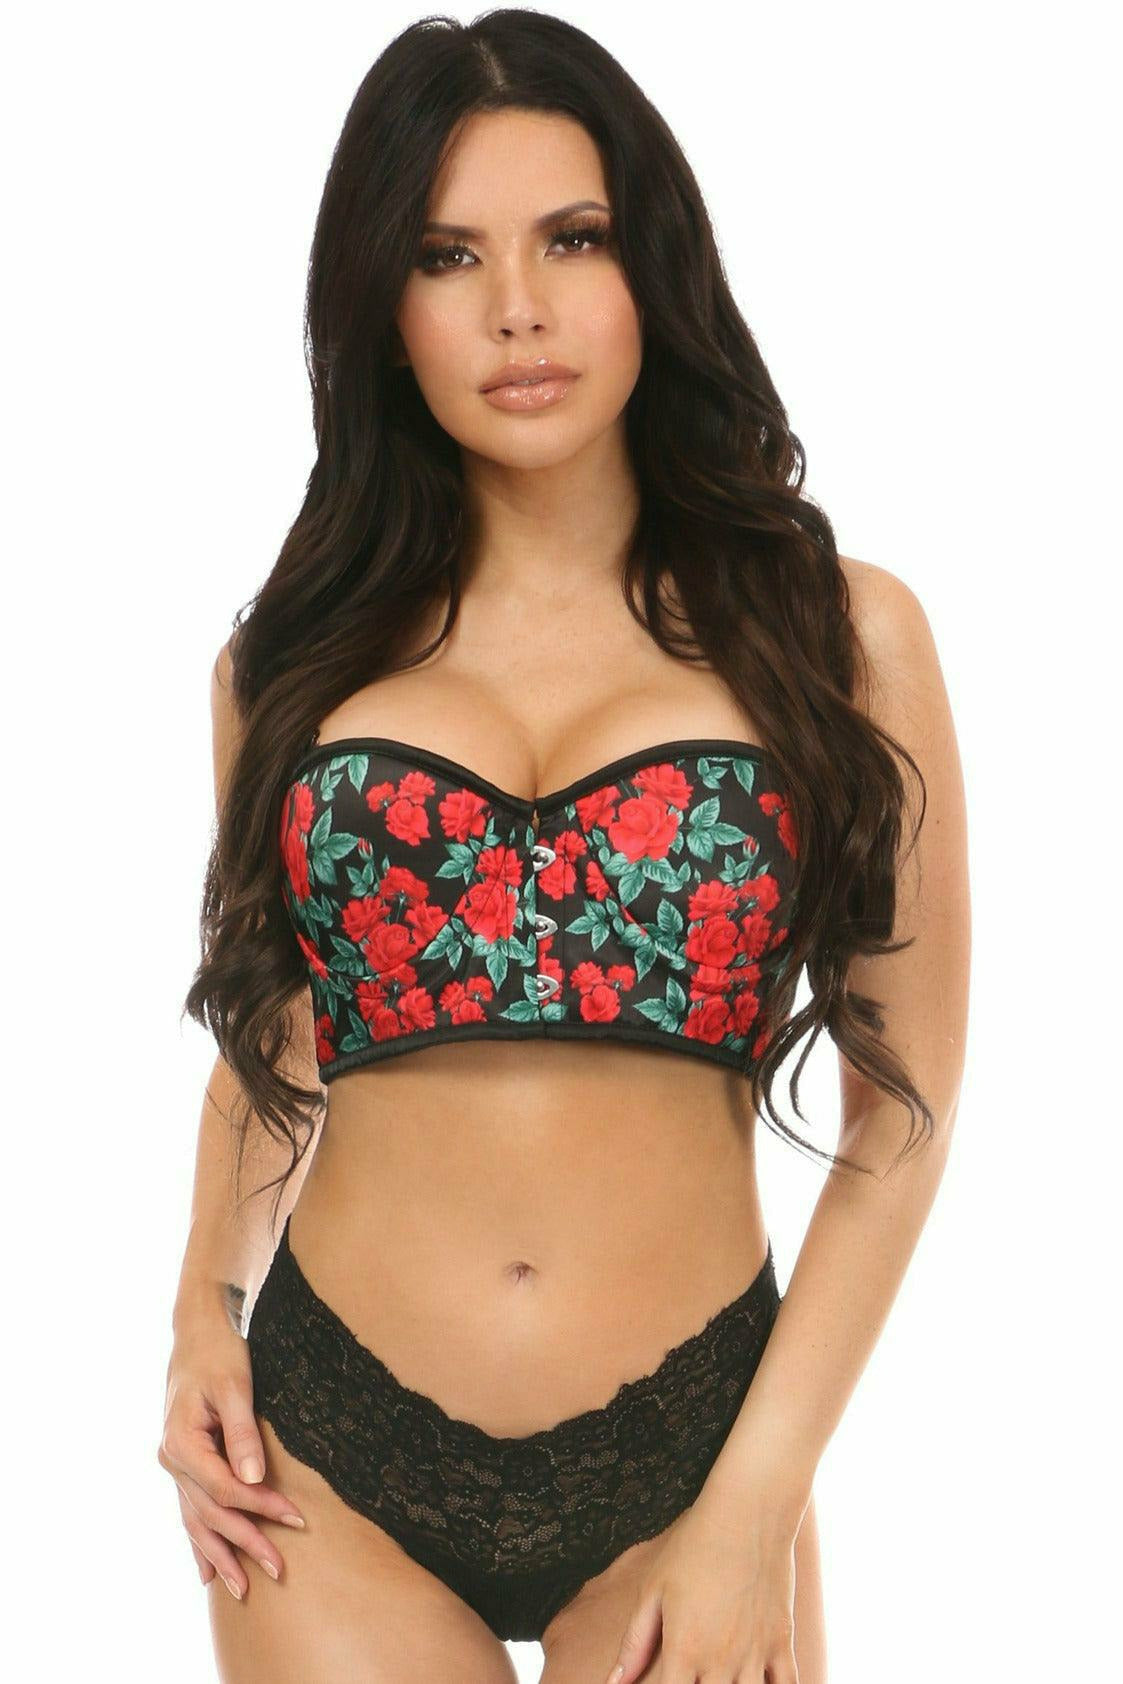 Daisy Corsets Lavish Red Roses Underwire Short Bustier